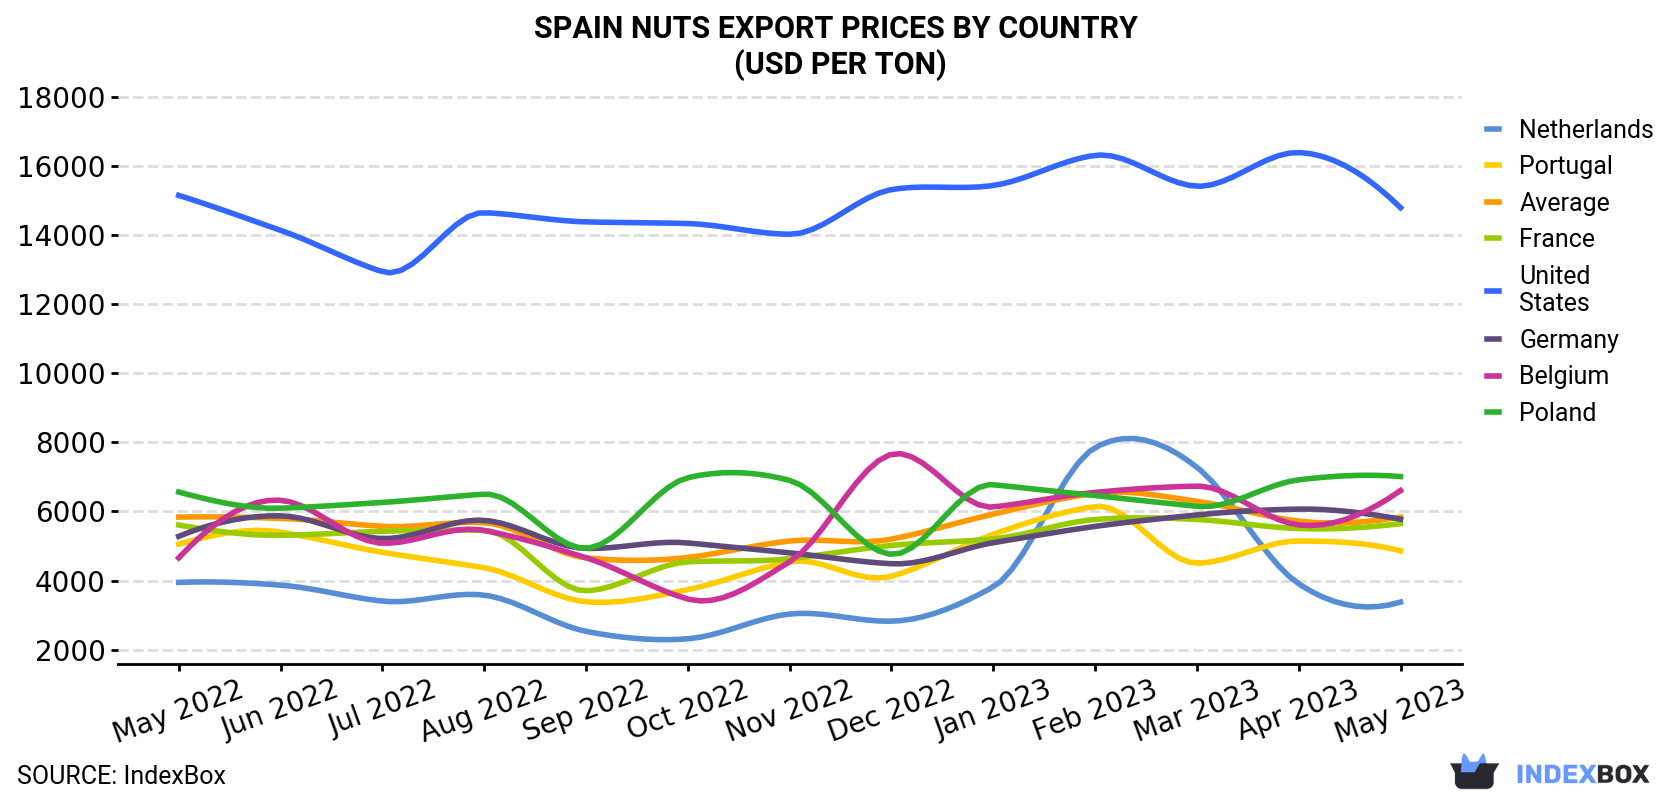 Spain Nuts Export Prices By Country (USD Per Ton)